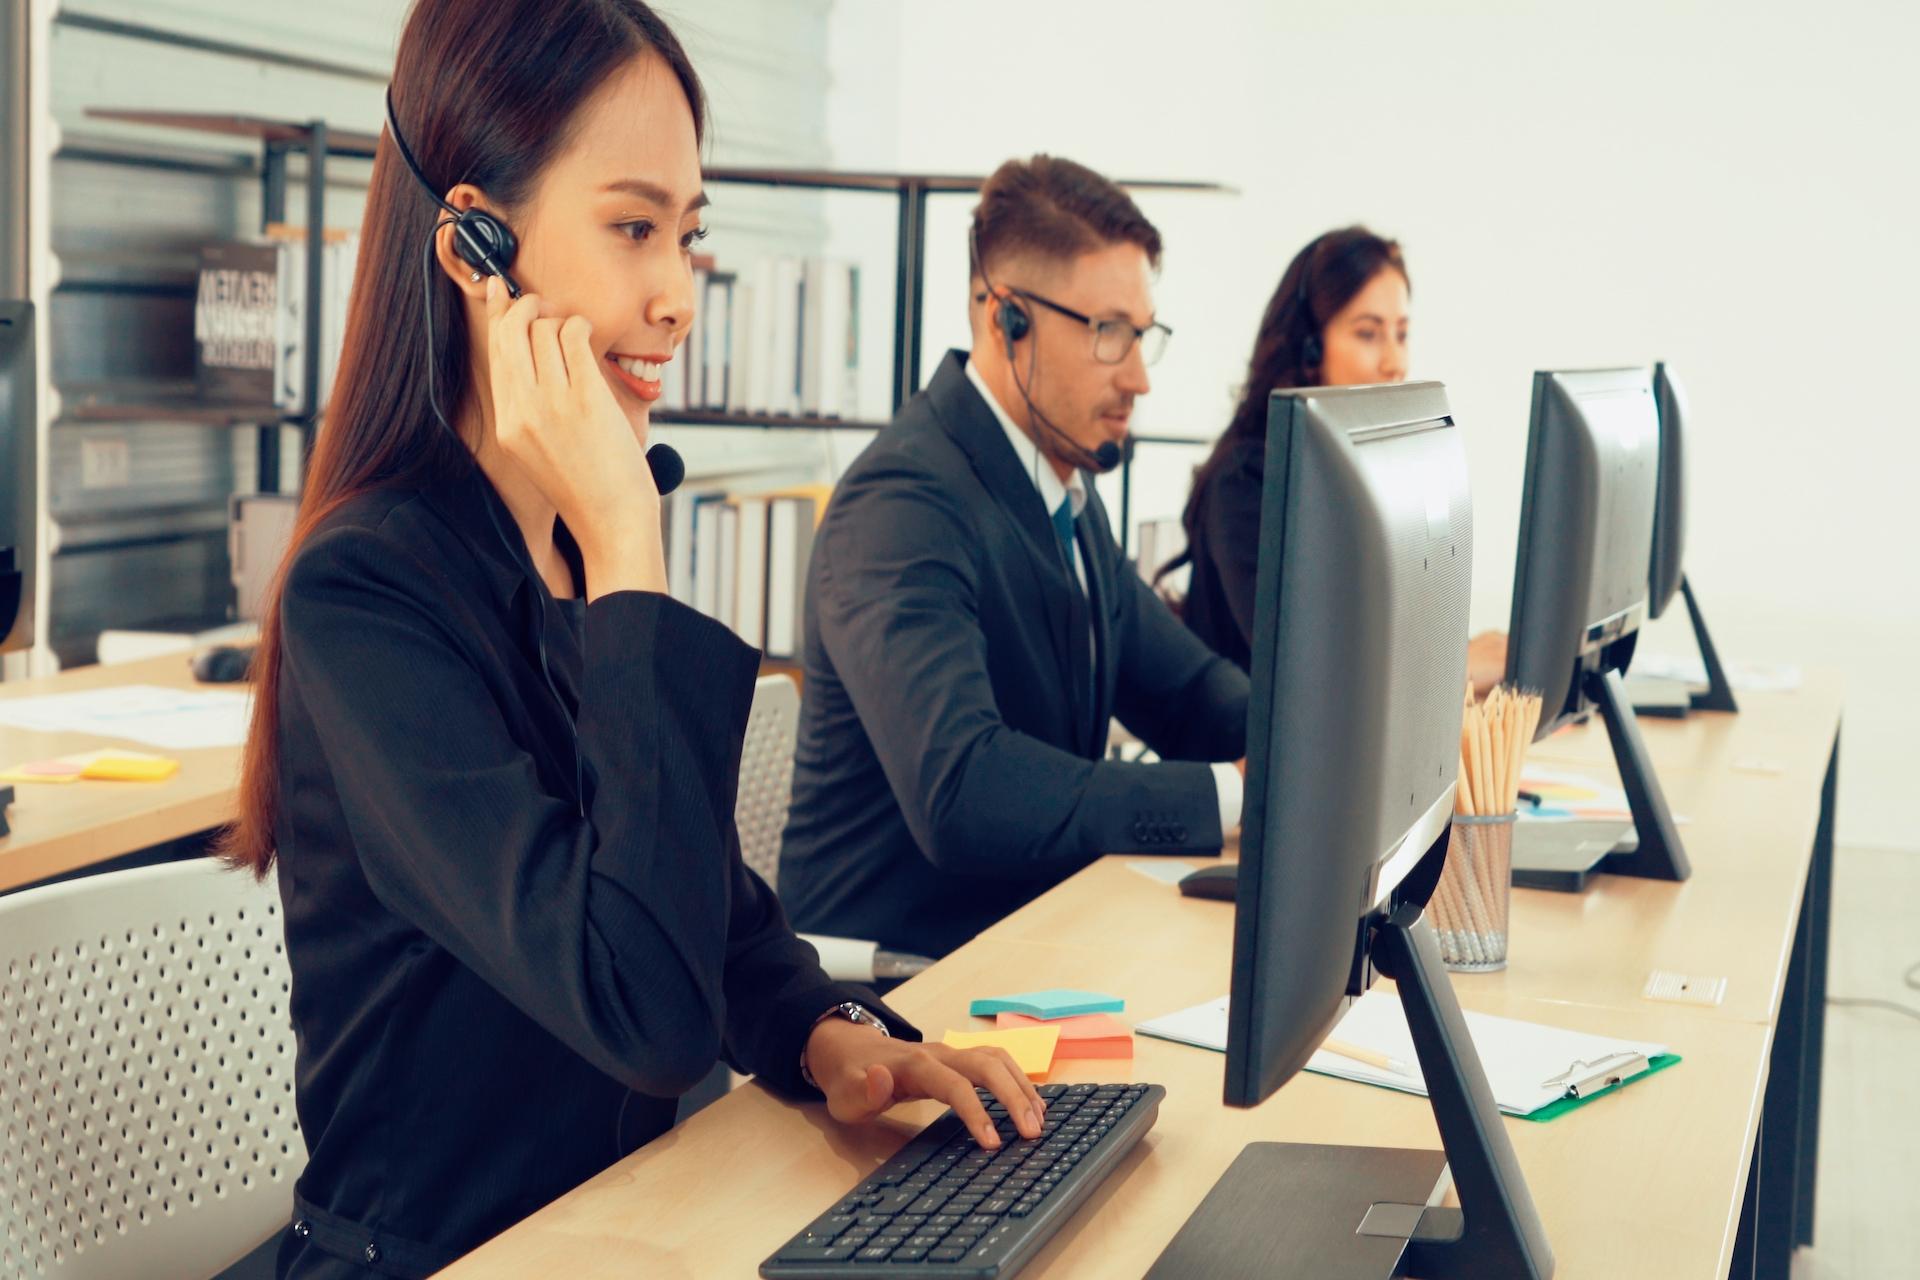 Outsourced Telemarketing Services Help Boost Customer Relationships